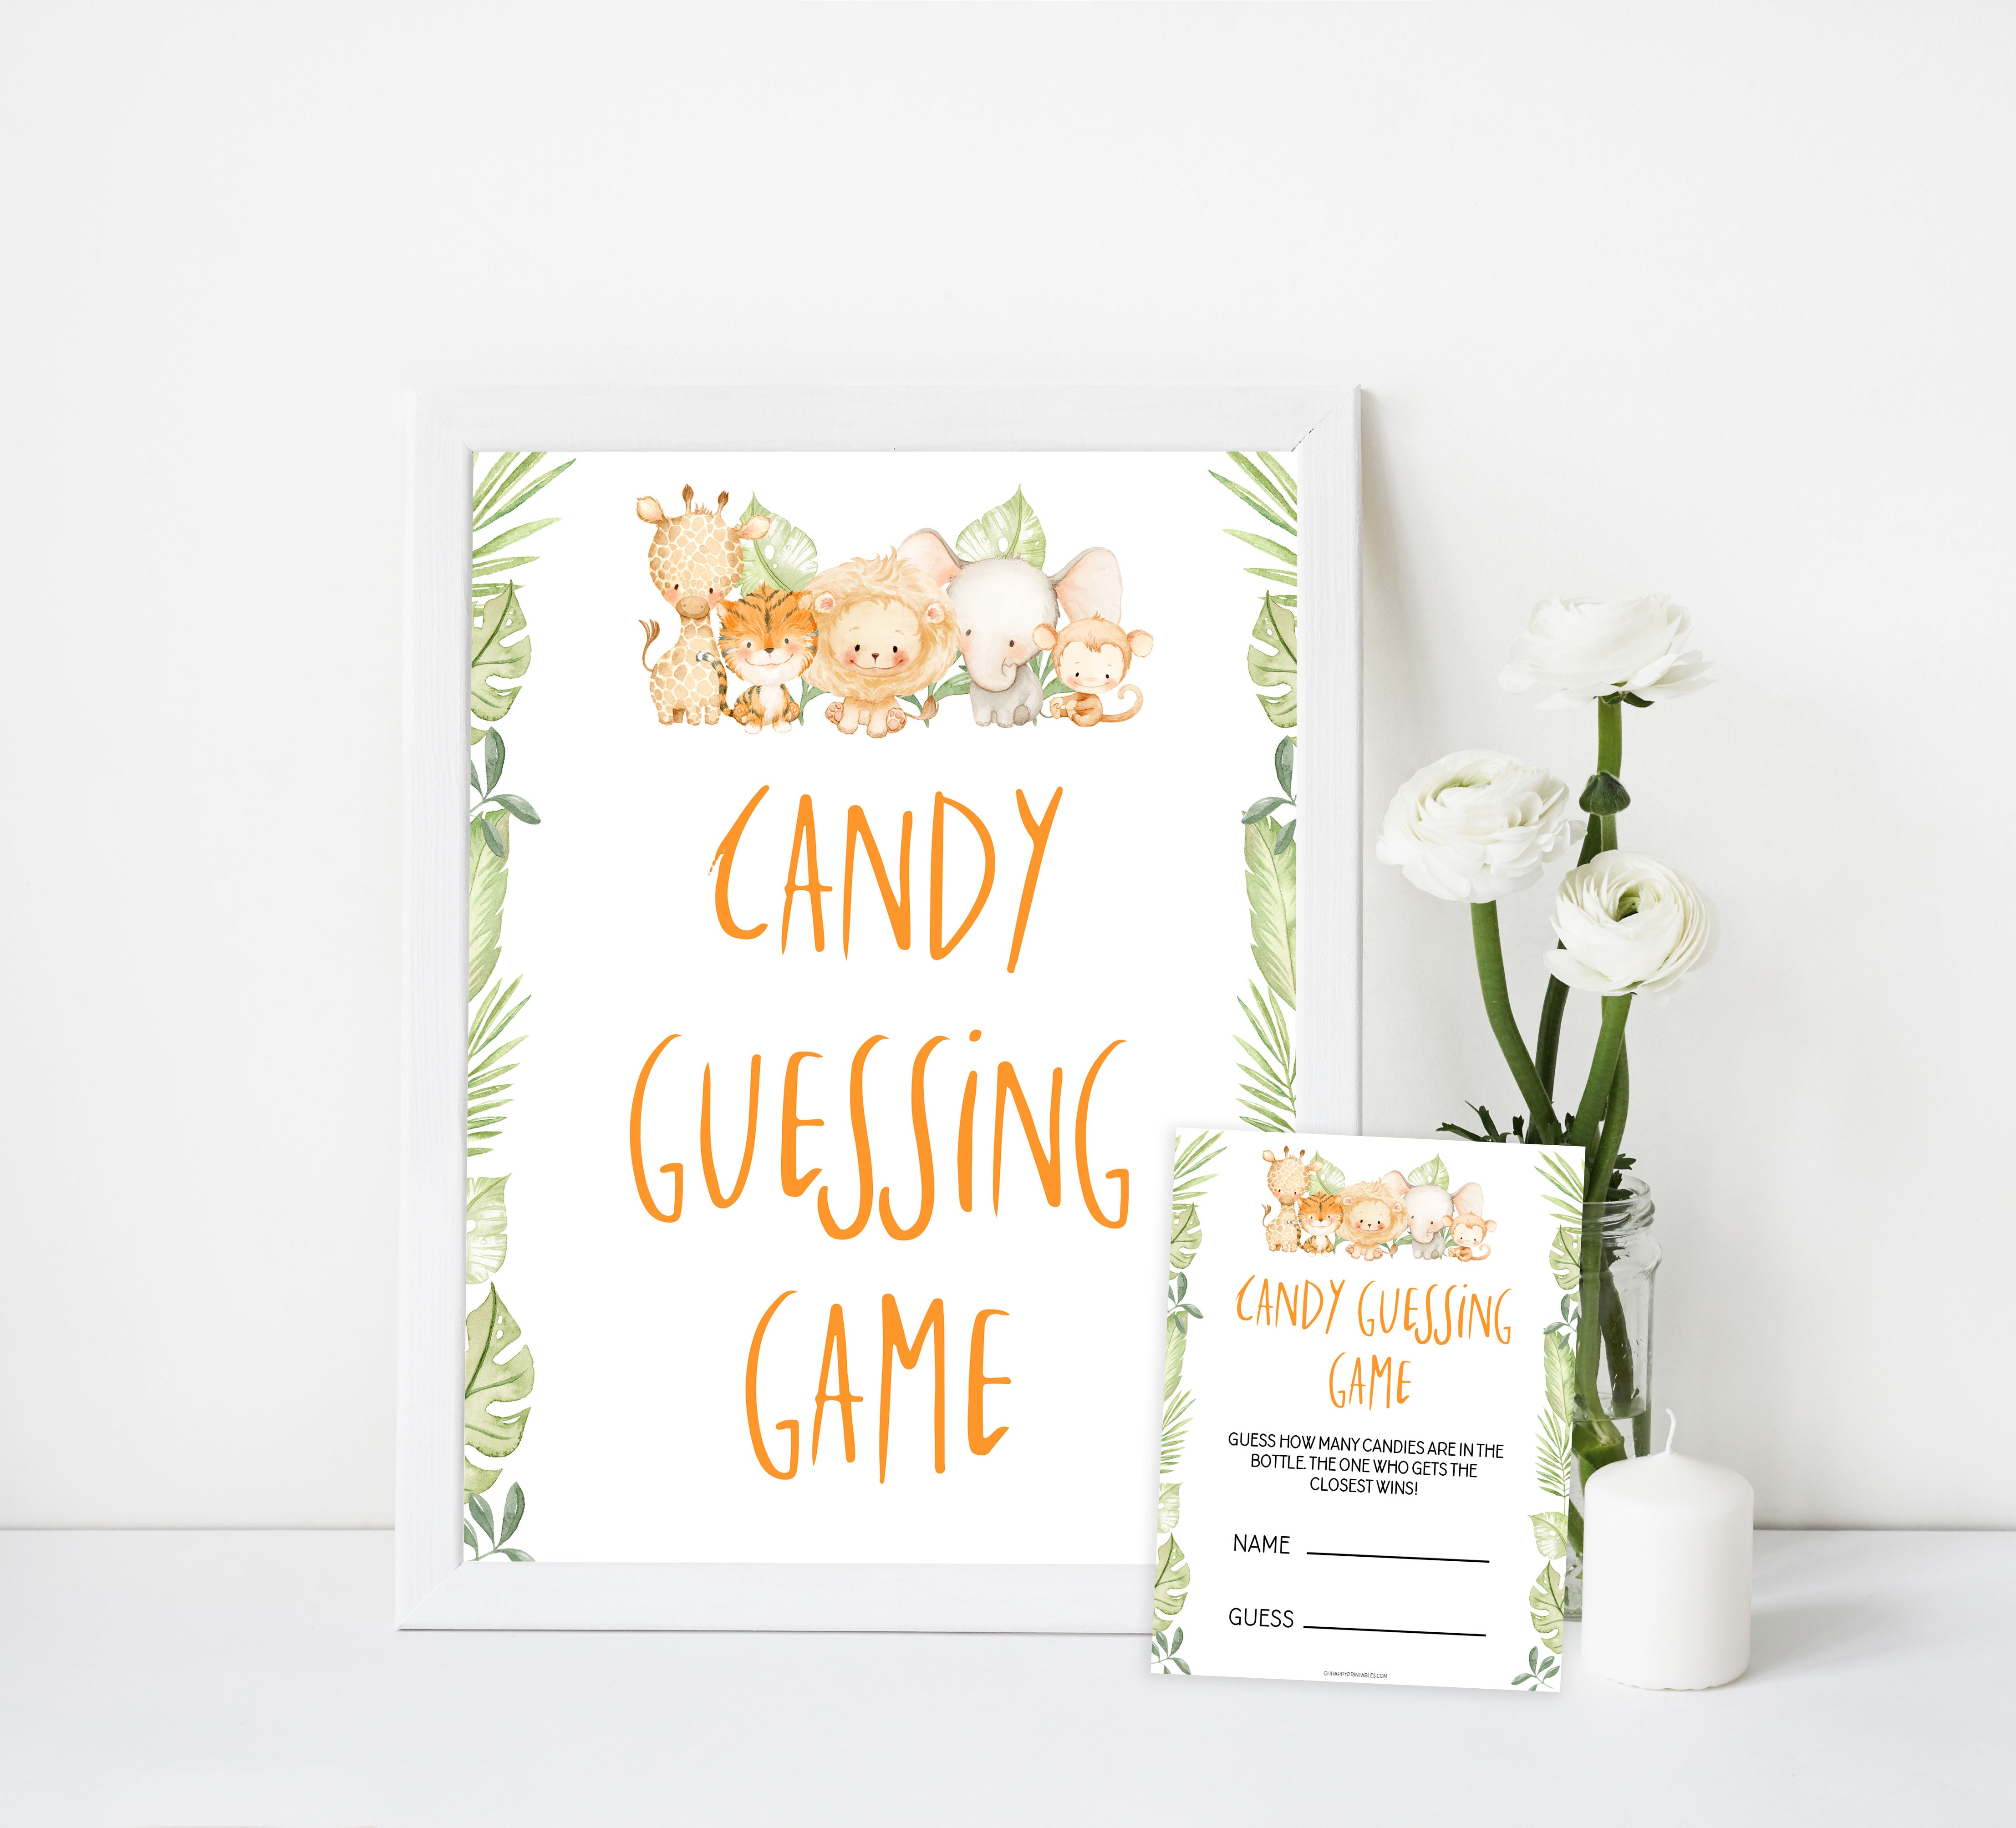 candy guessing game, Printable baby shower games, safari animals baby games, baby shower games, fun baby shower ideas, top baby shower ideas, safari animals baby shower, baby shower games, fun baby shower ideas